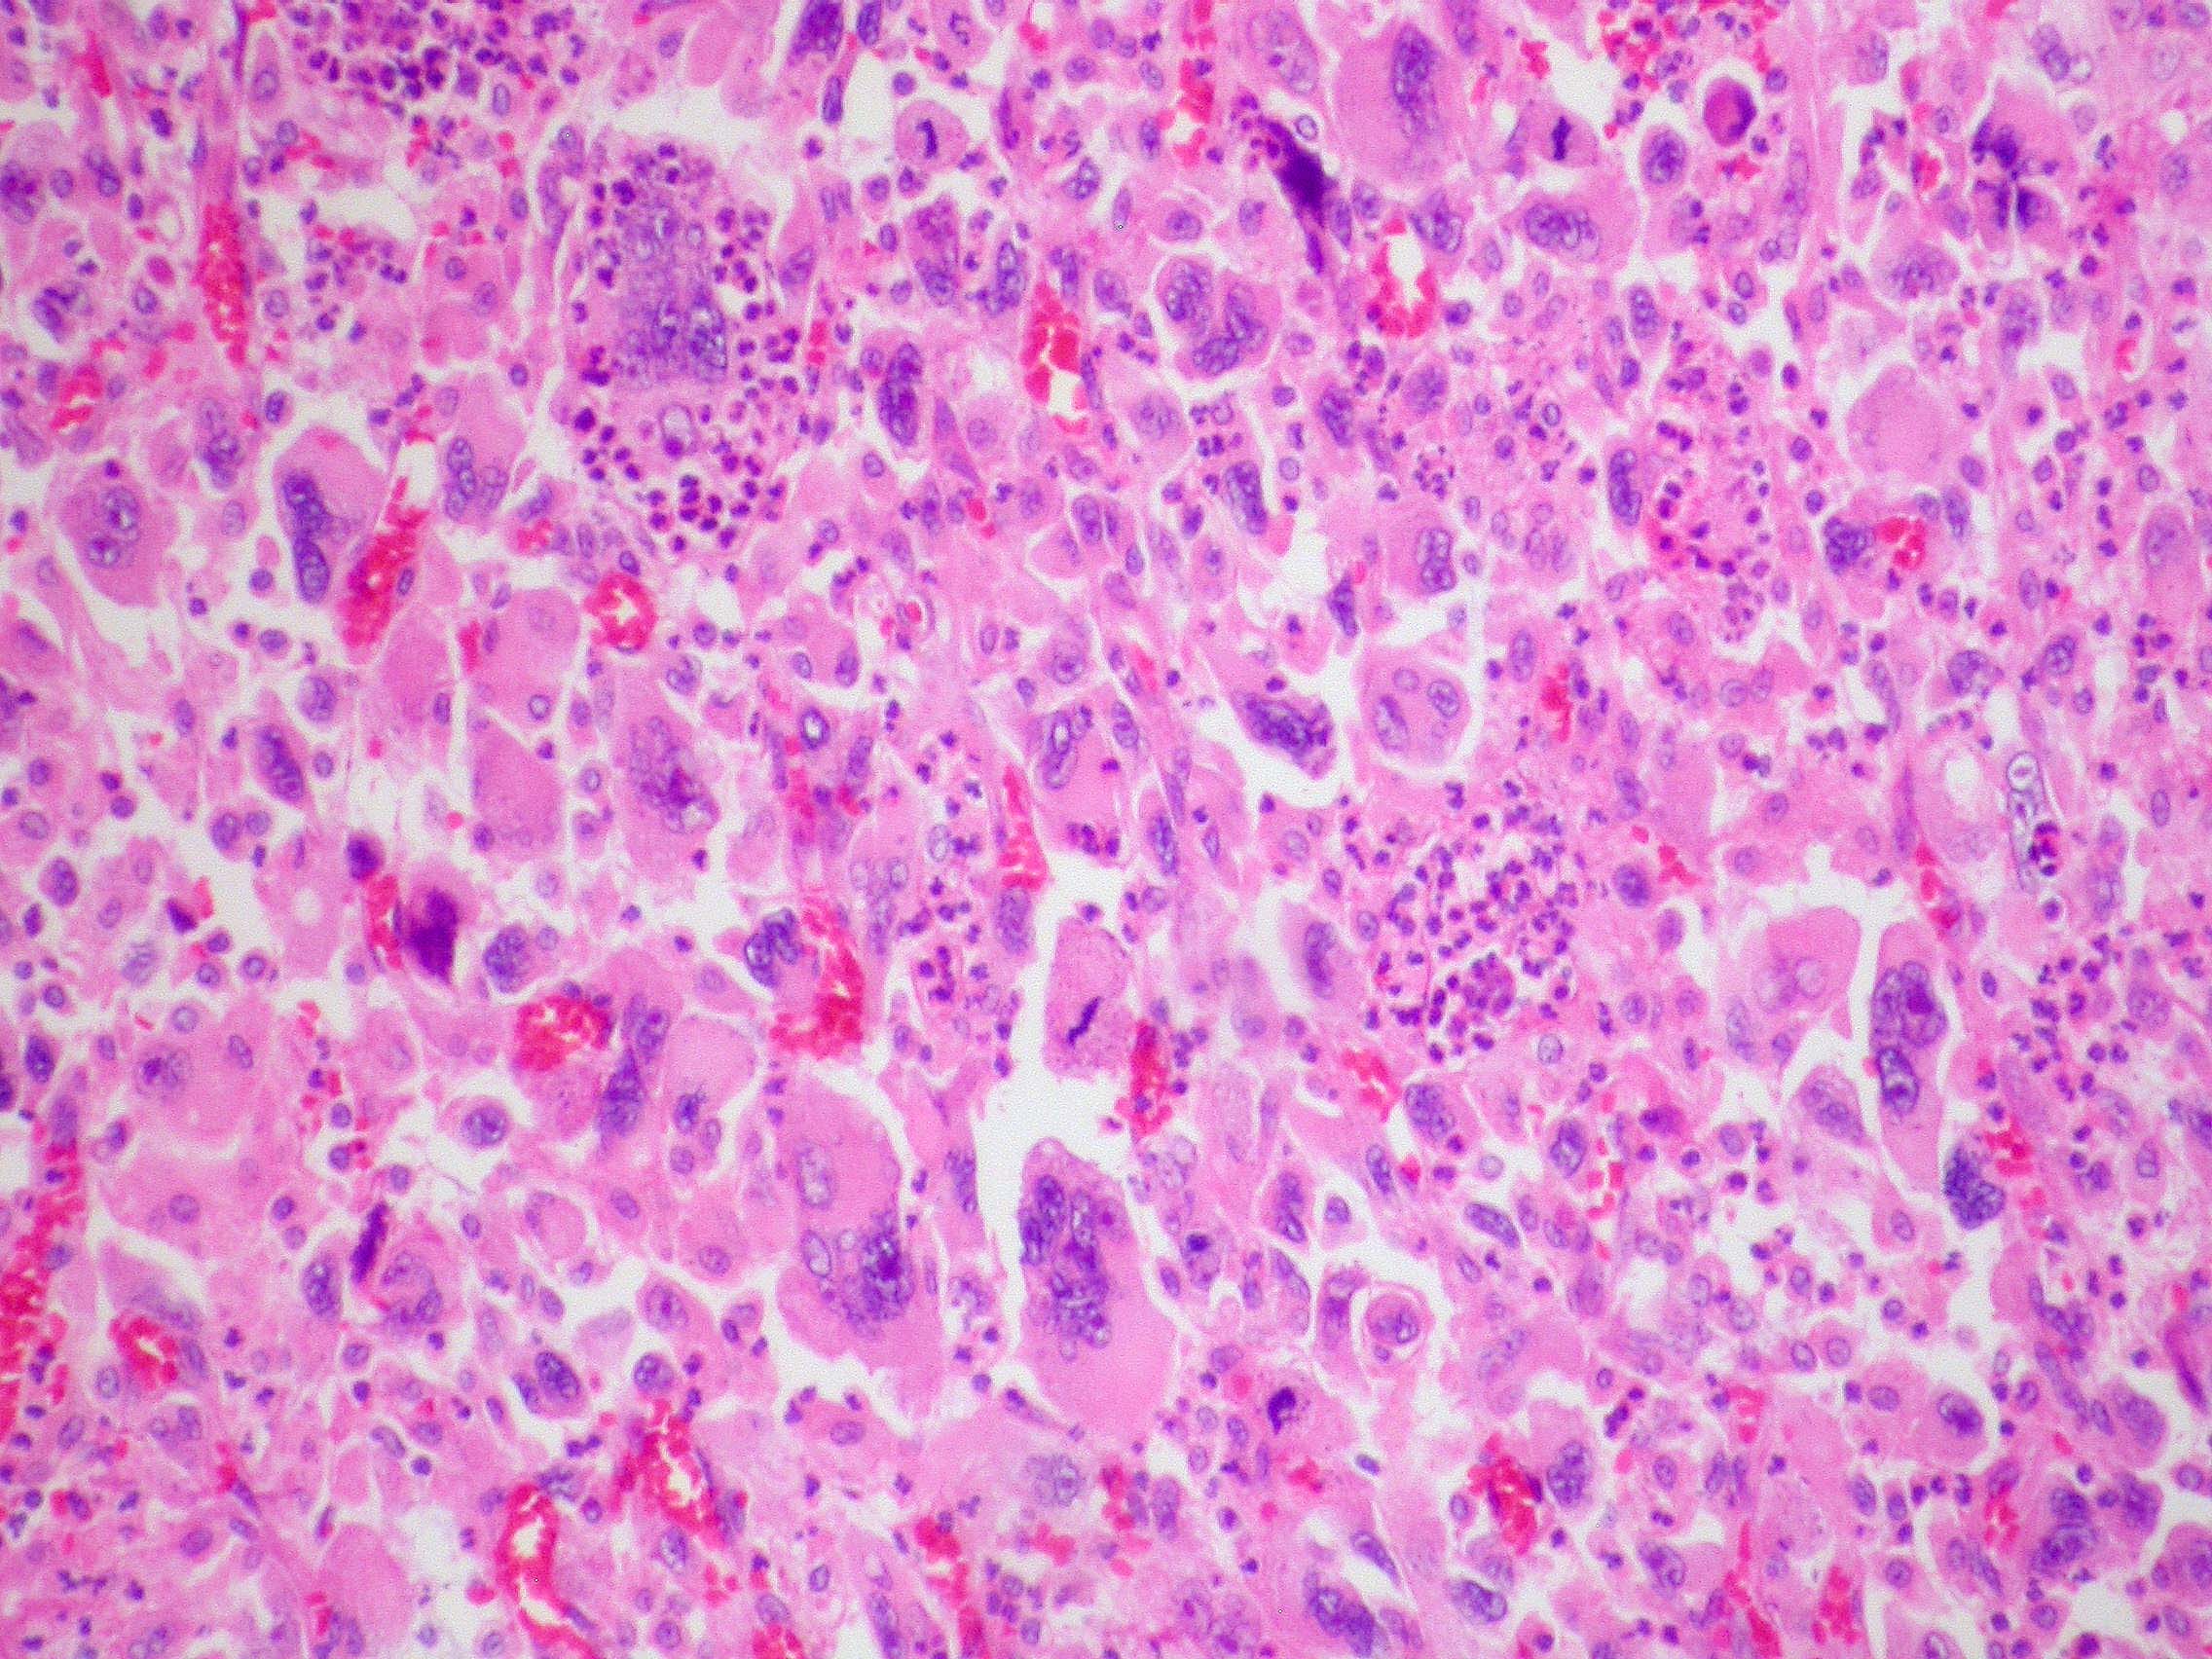 Giant cell carcinoma